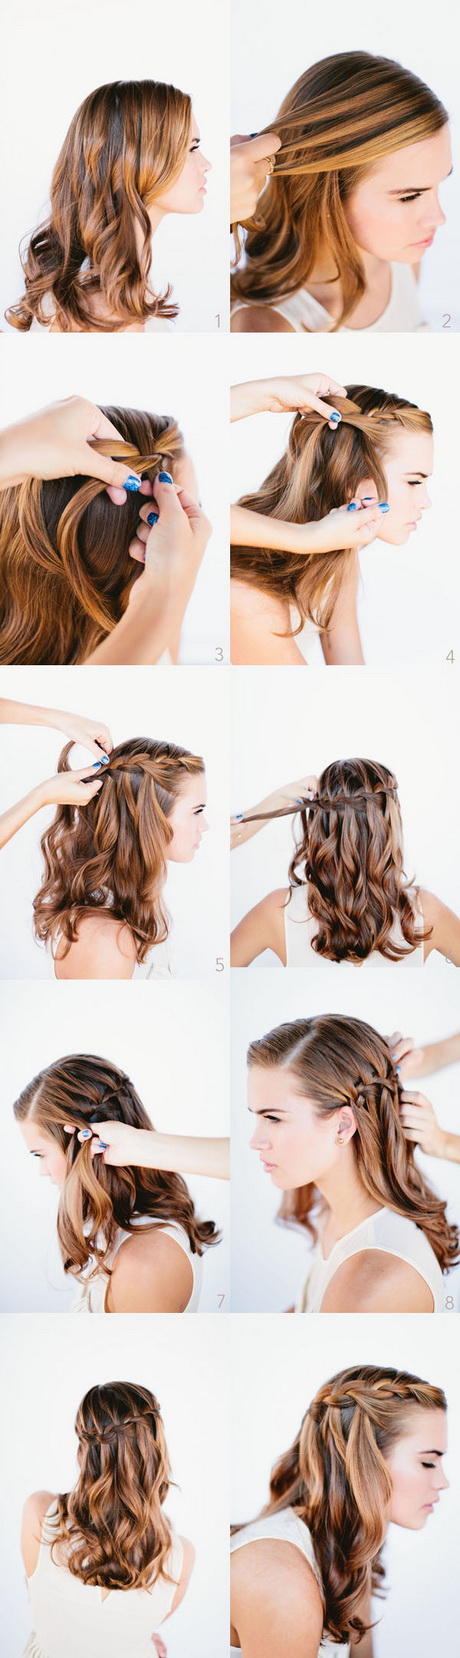 Easy step by step hairstyles for long hair easy-step-by-step-hairstyles-for-long-hair-92-16